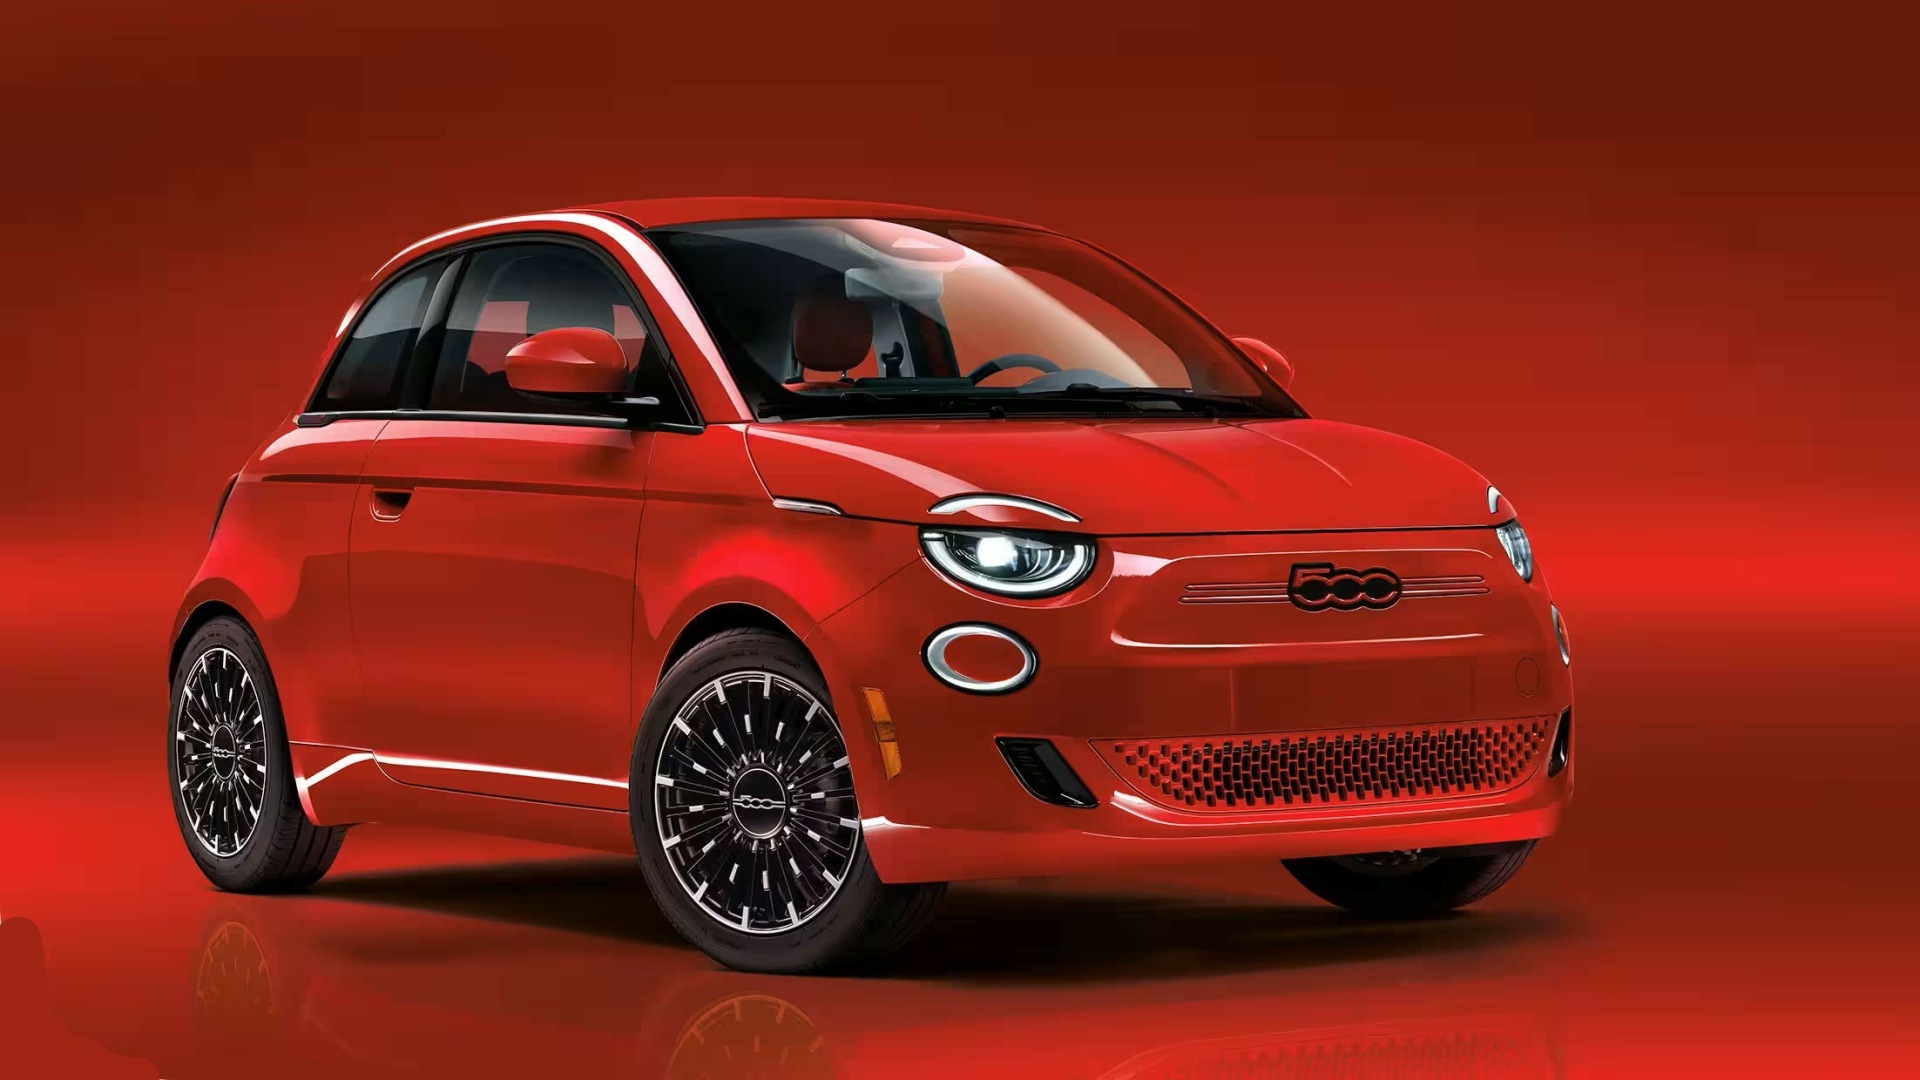 Freshening Up The Fiat 500e: A Look At Fiat's Unique Marketing Strategy